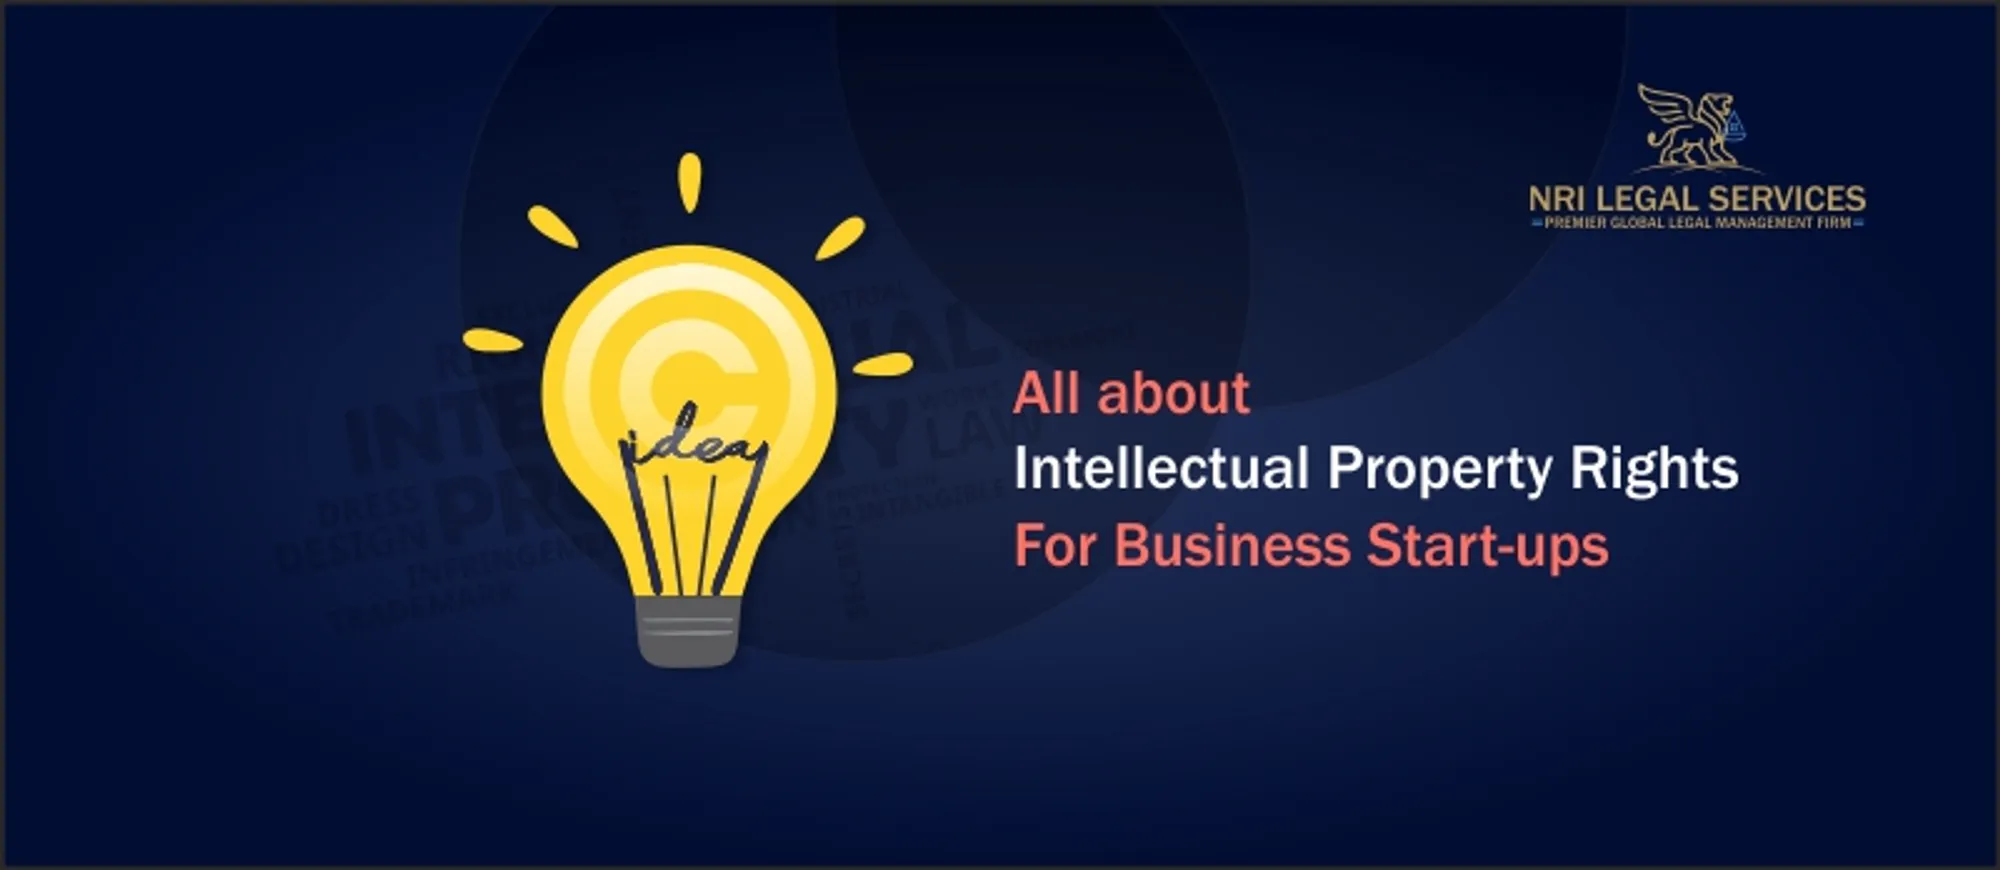 All about Intellectual Property Rights (IPR) For Business Start-ups